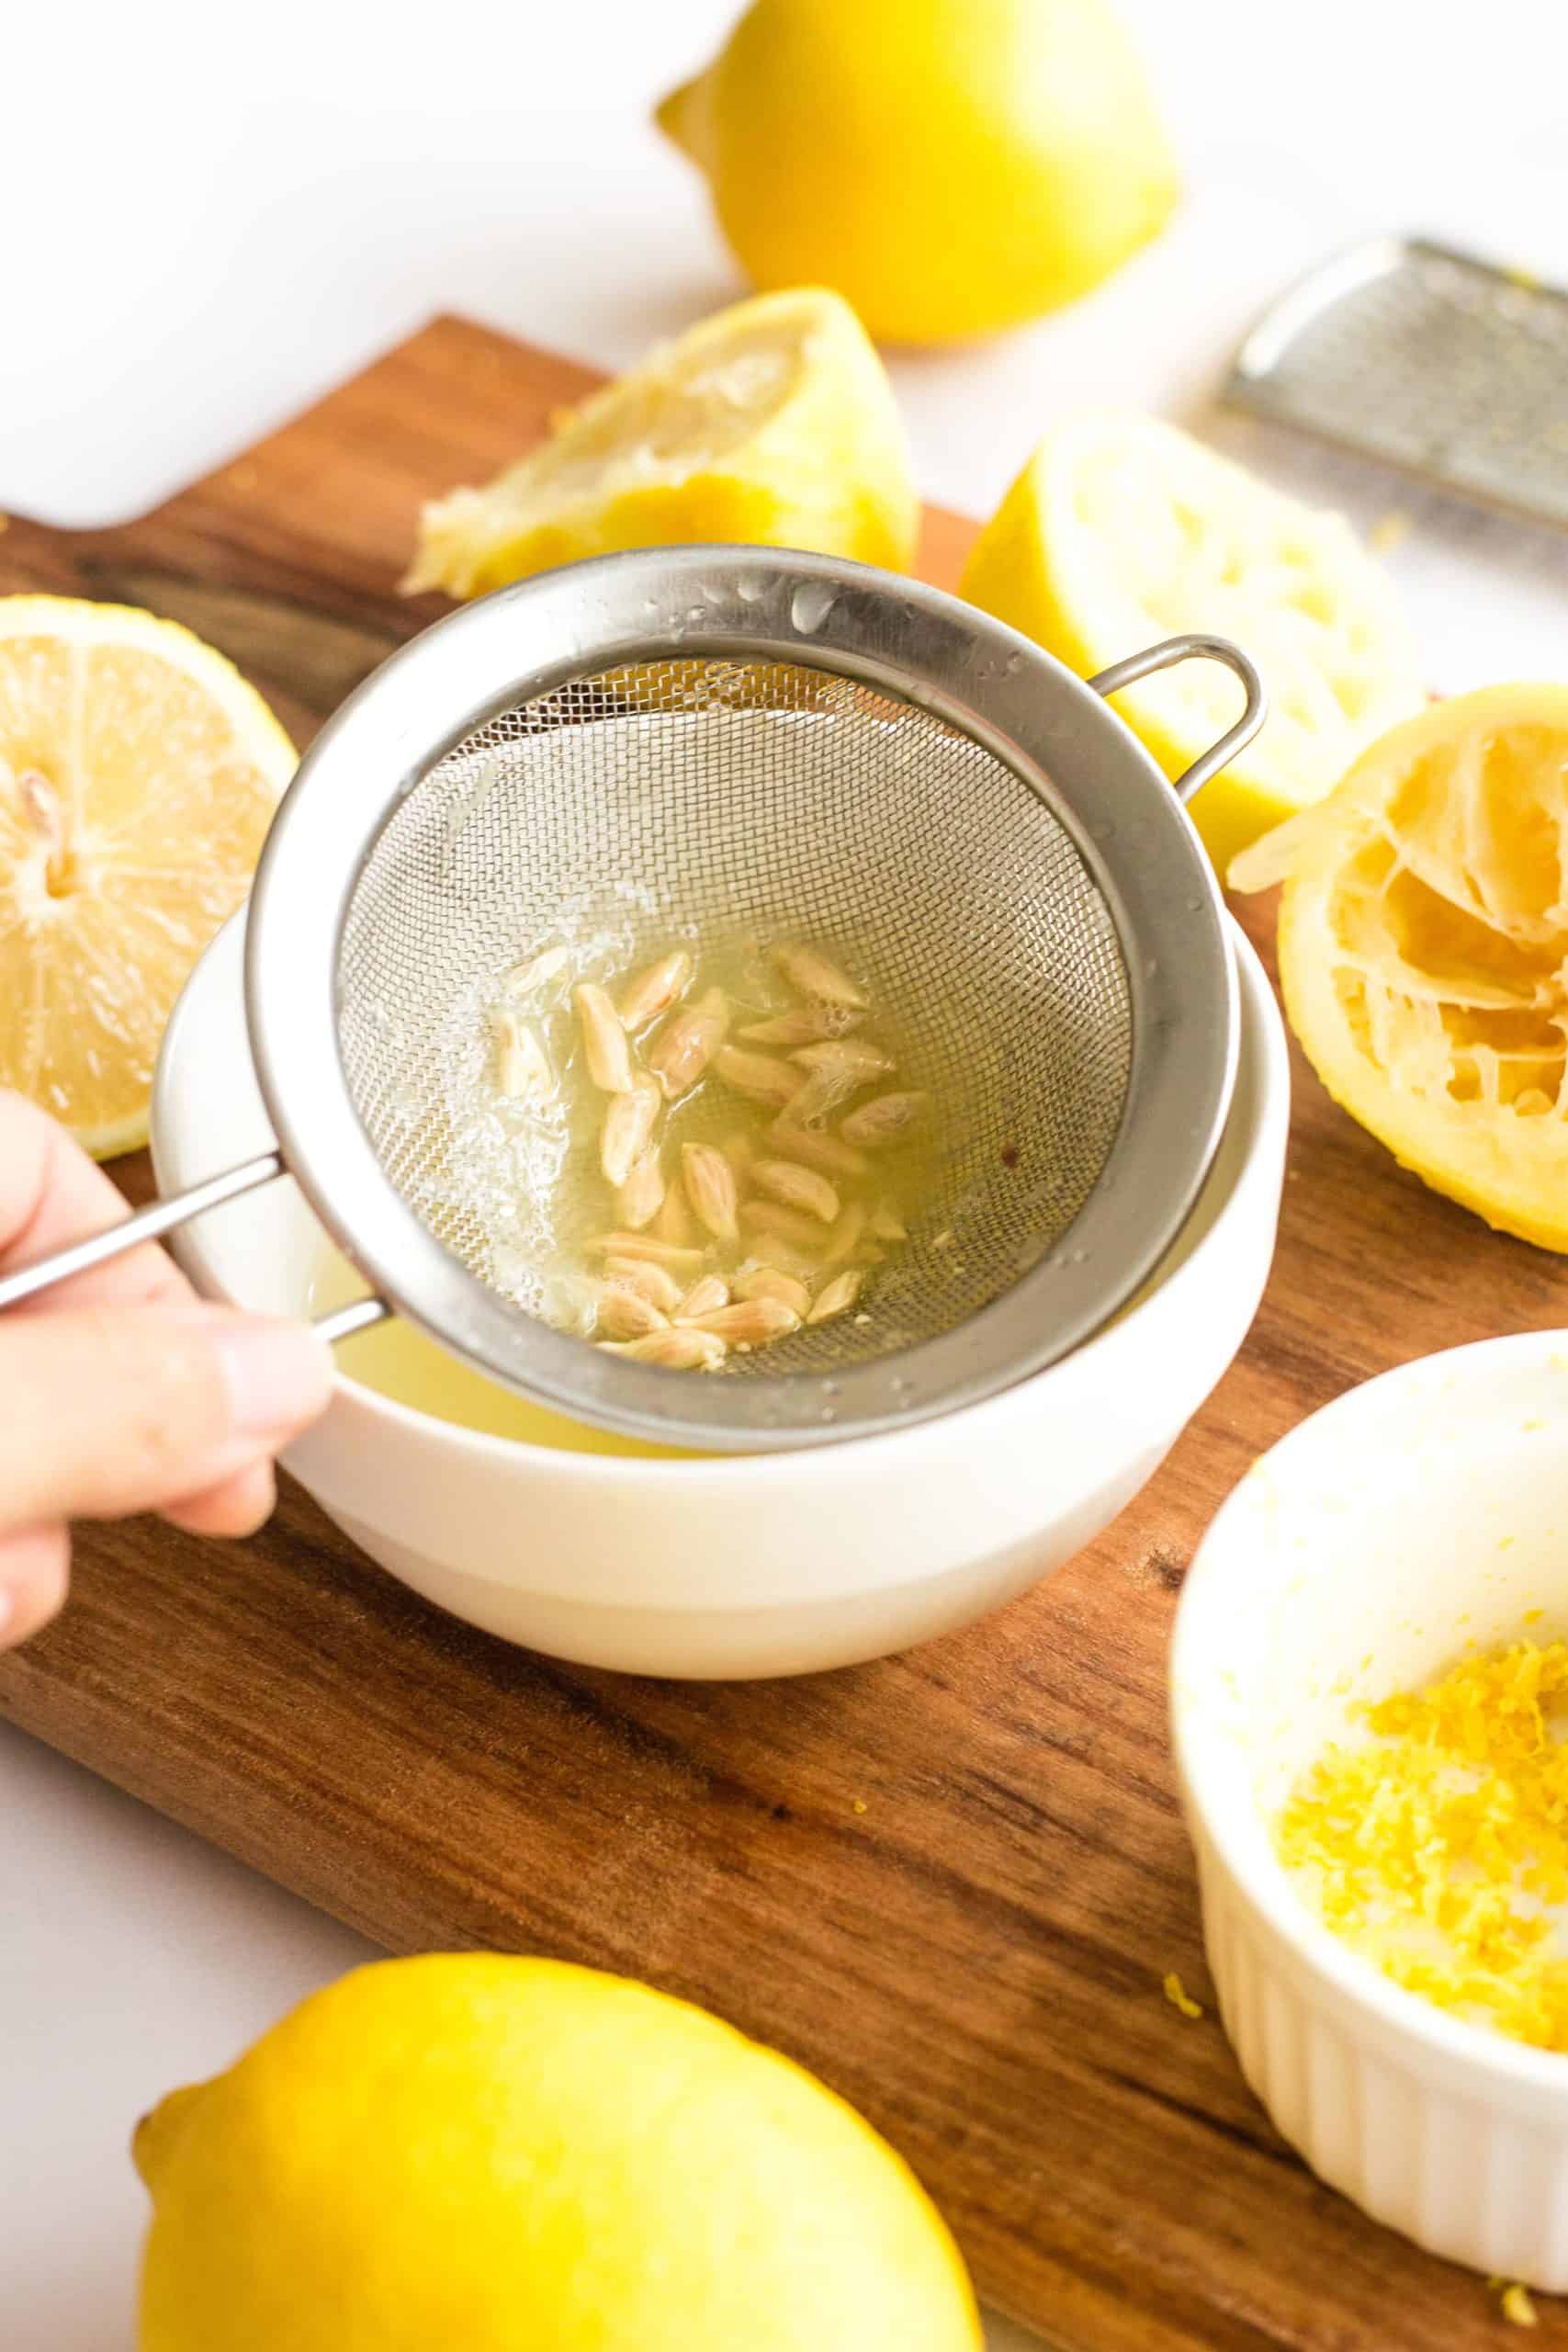 Using a strainer to separate lemon seeds from lemon juice.